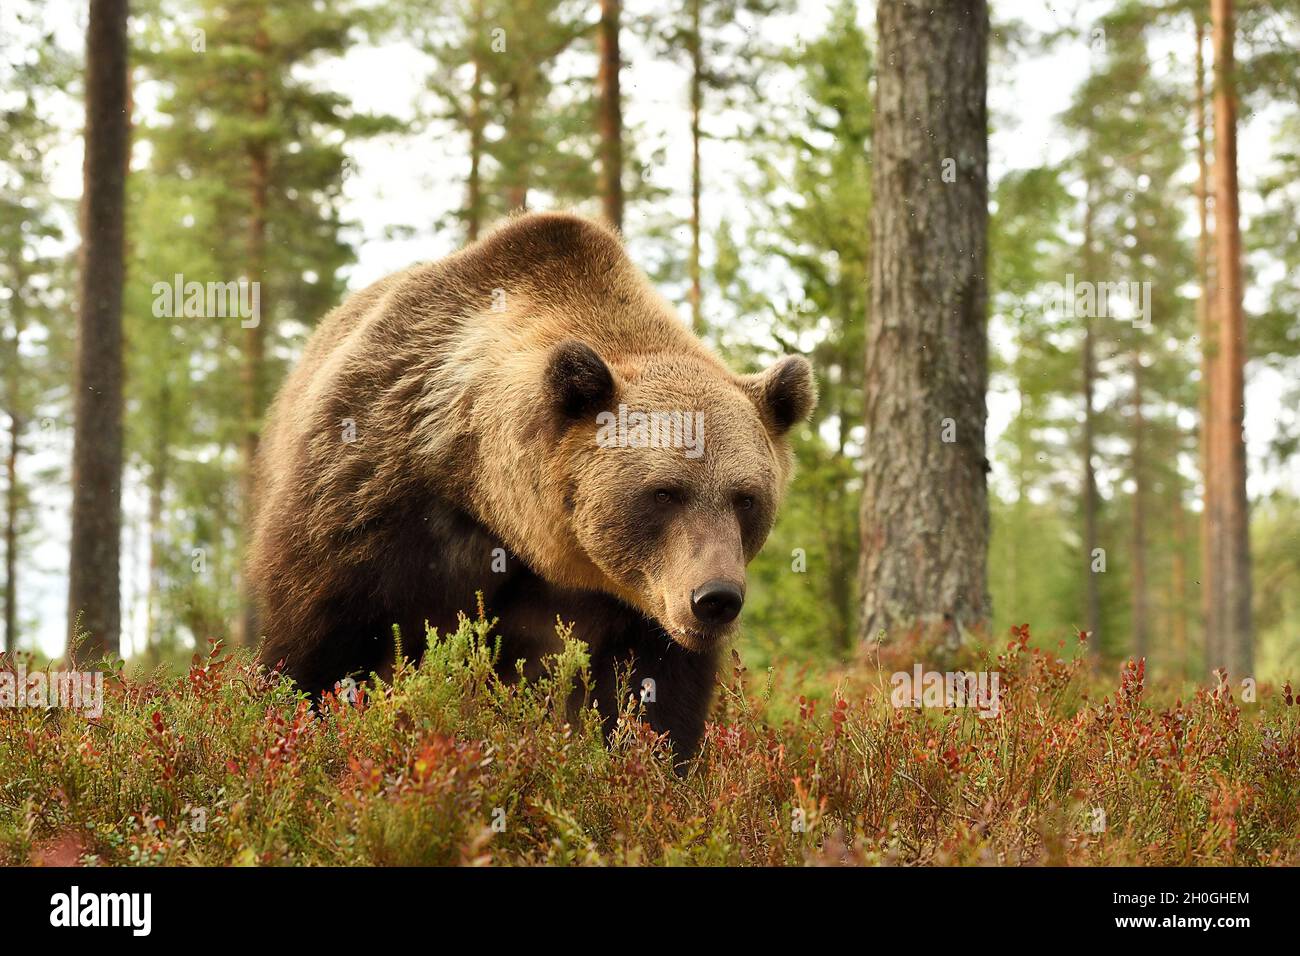 European brown bear in the forest scenery Stock Photo